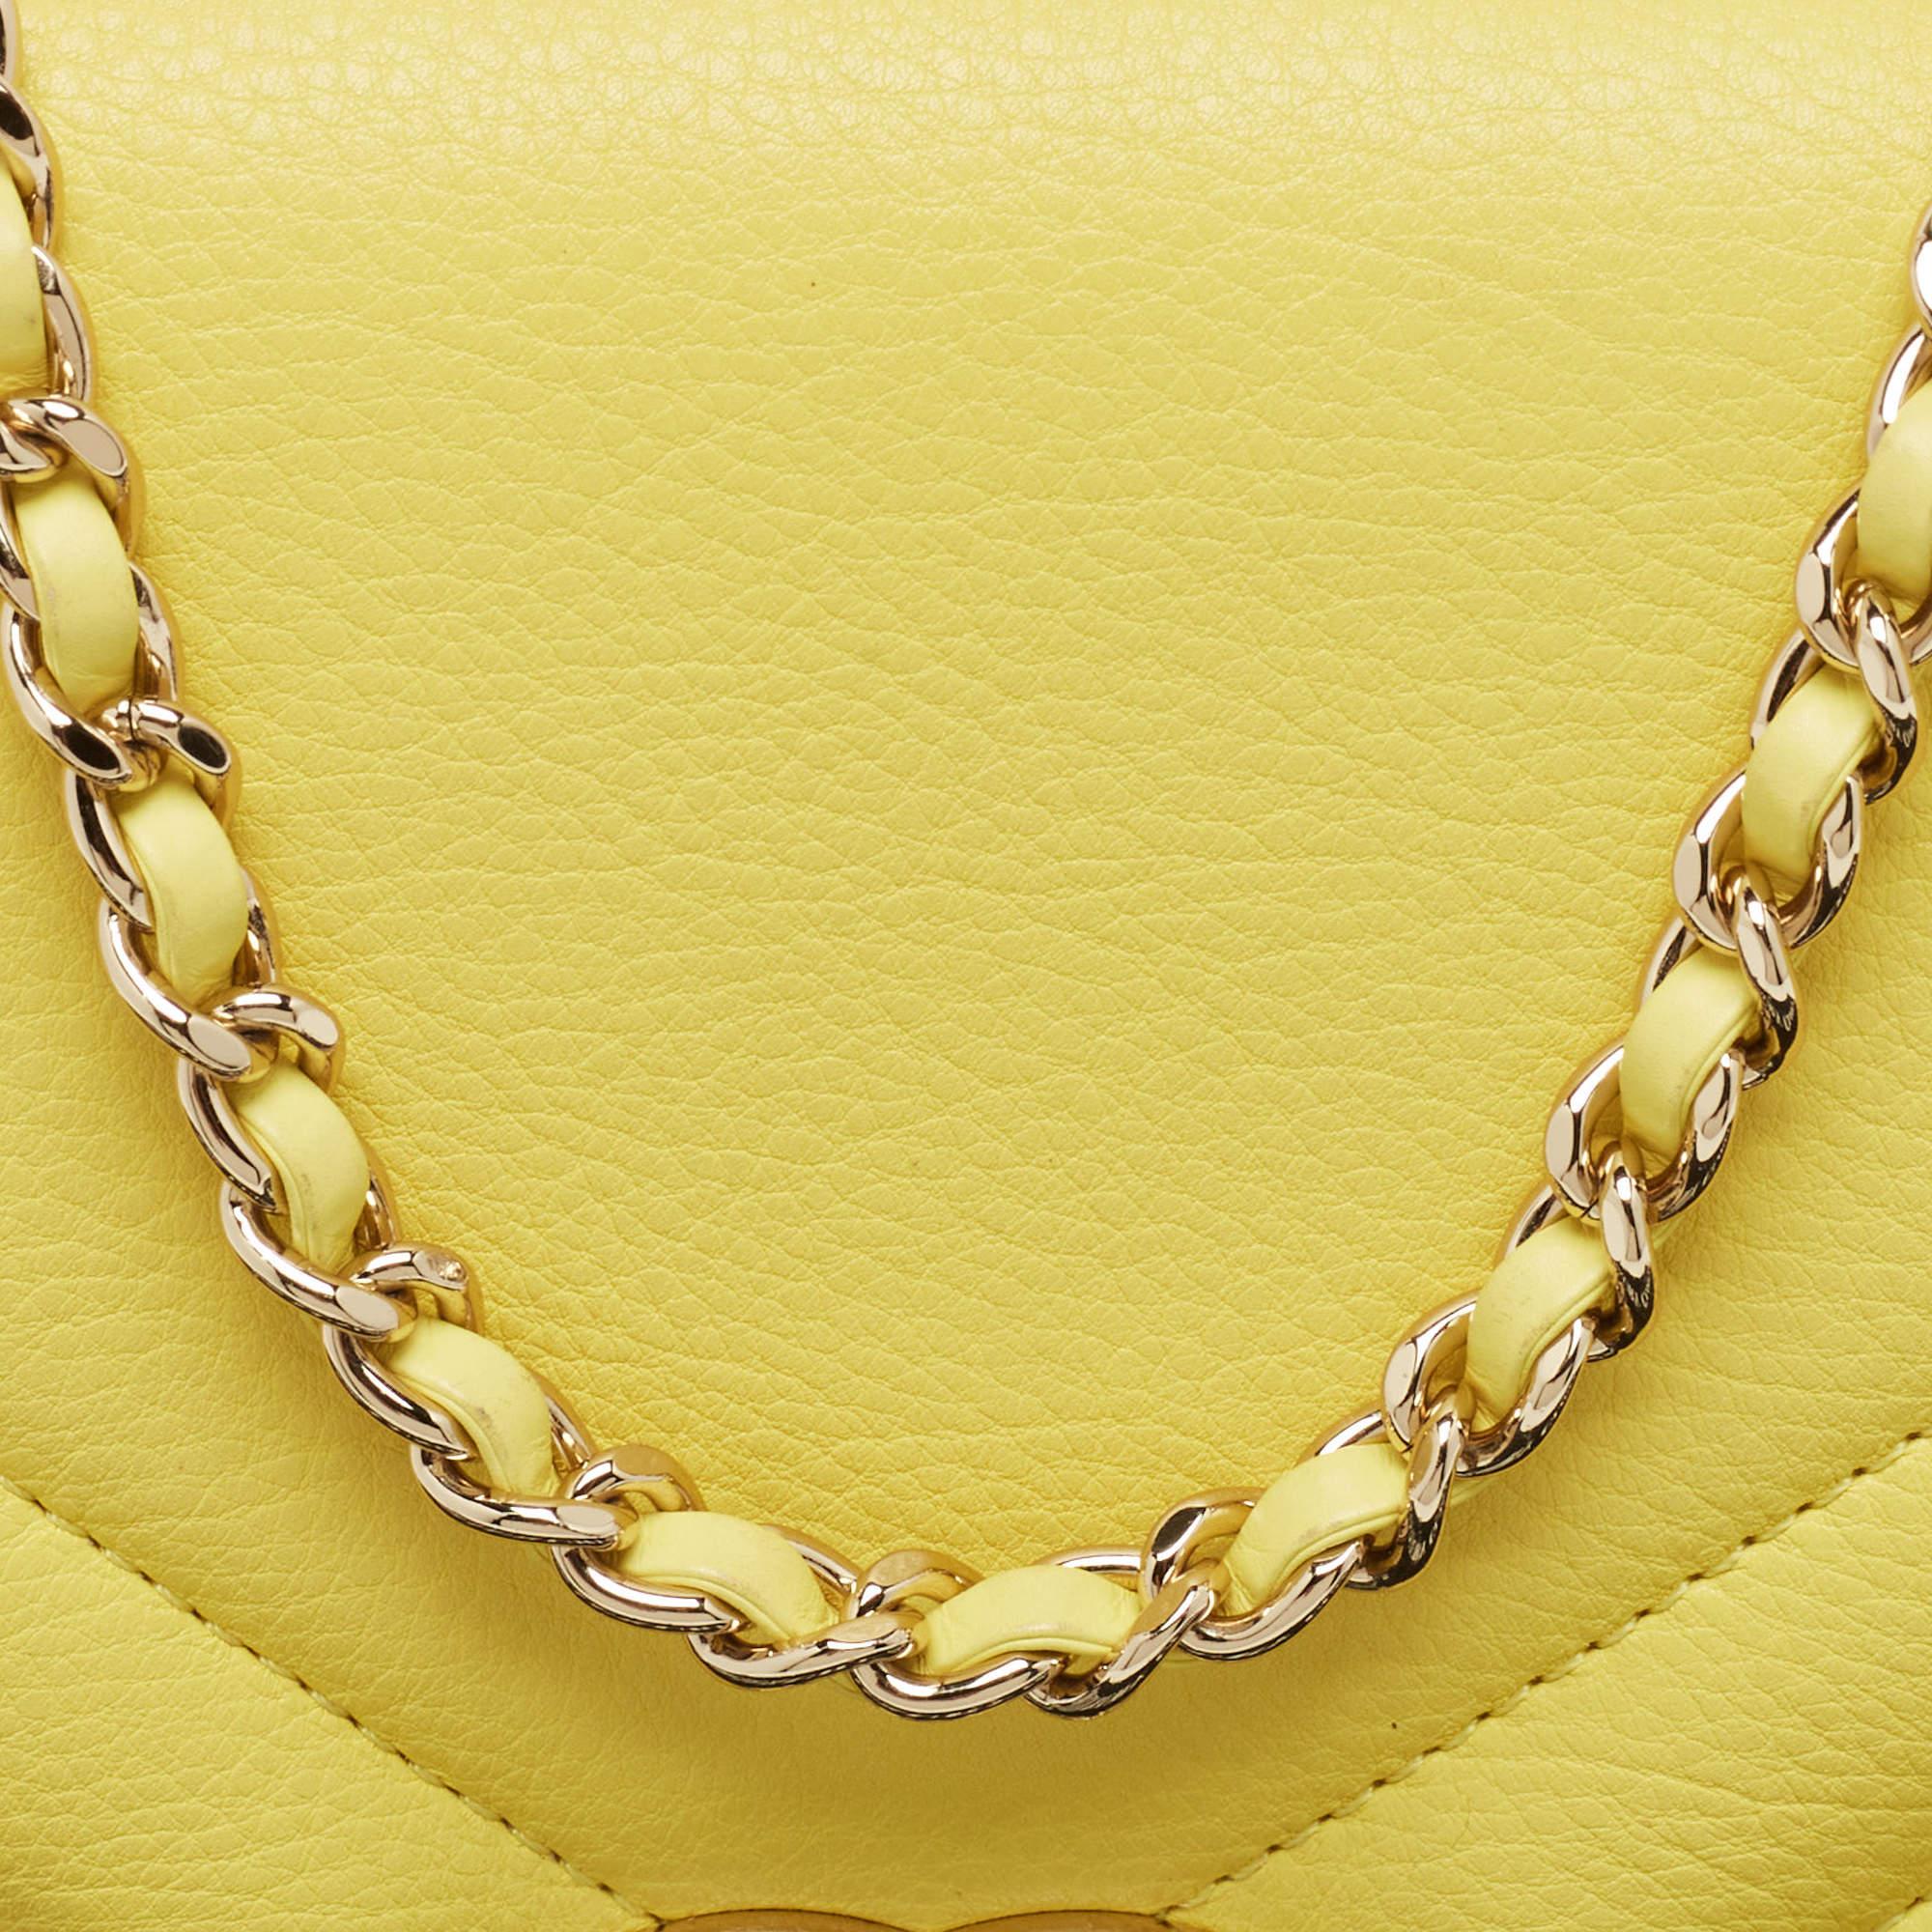 Chanel Yellow Leather Small Vintage Chevron Flap Bag 2